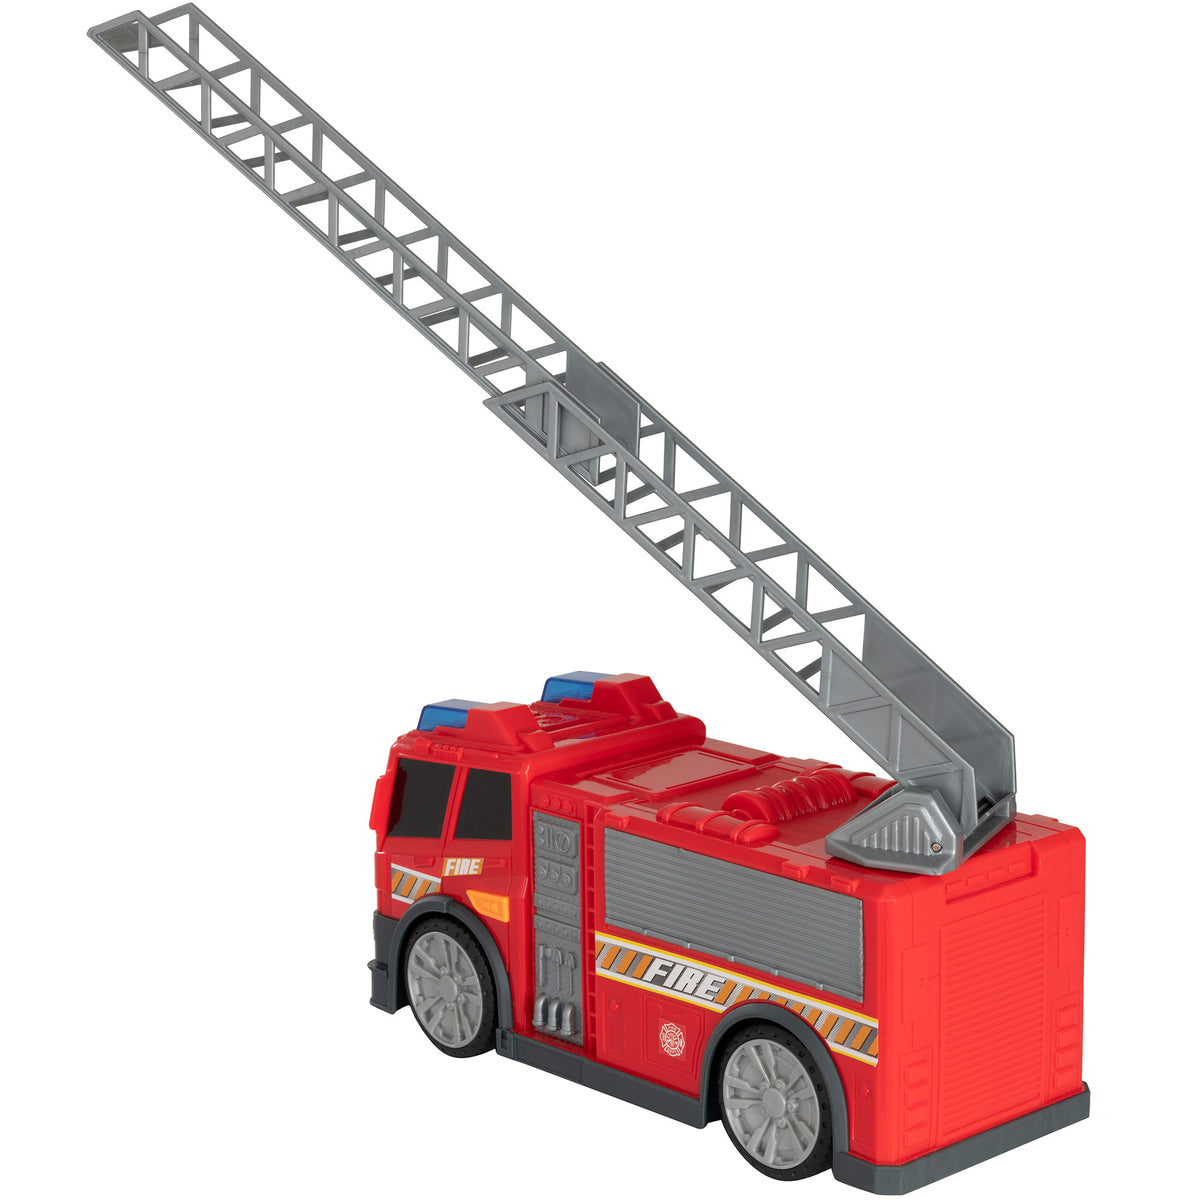 Teamsterz Mighty Machines Medium Fire Engine Toy